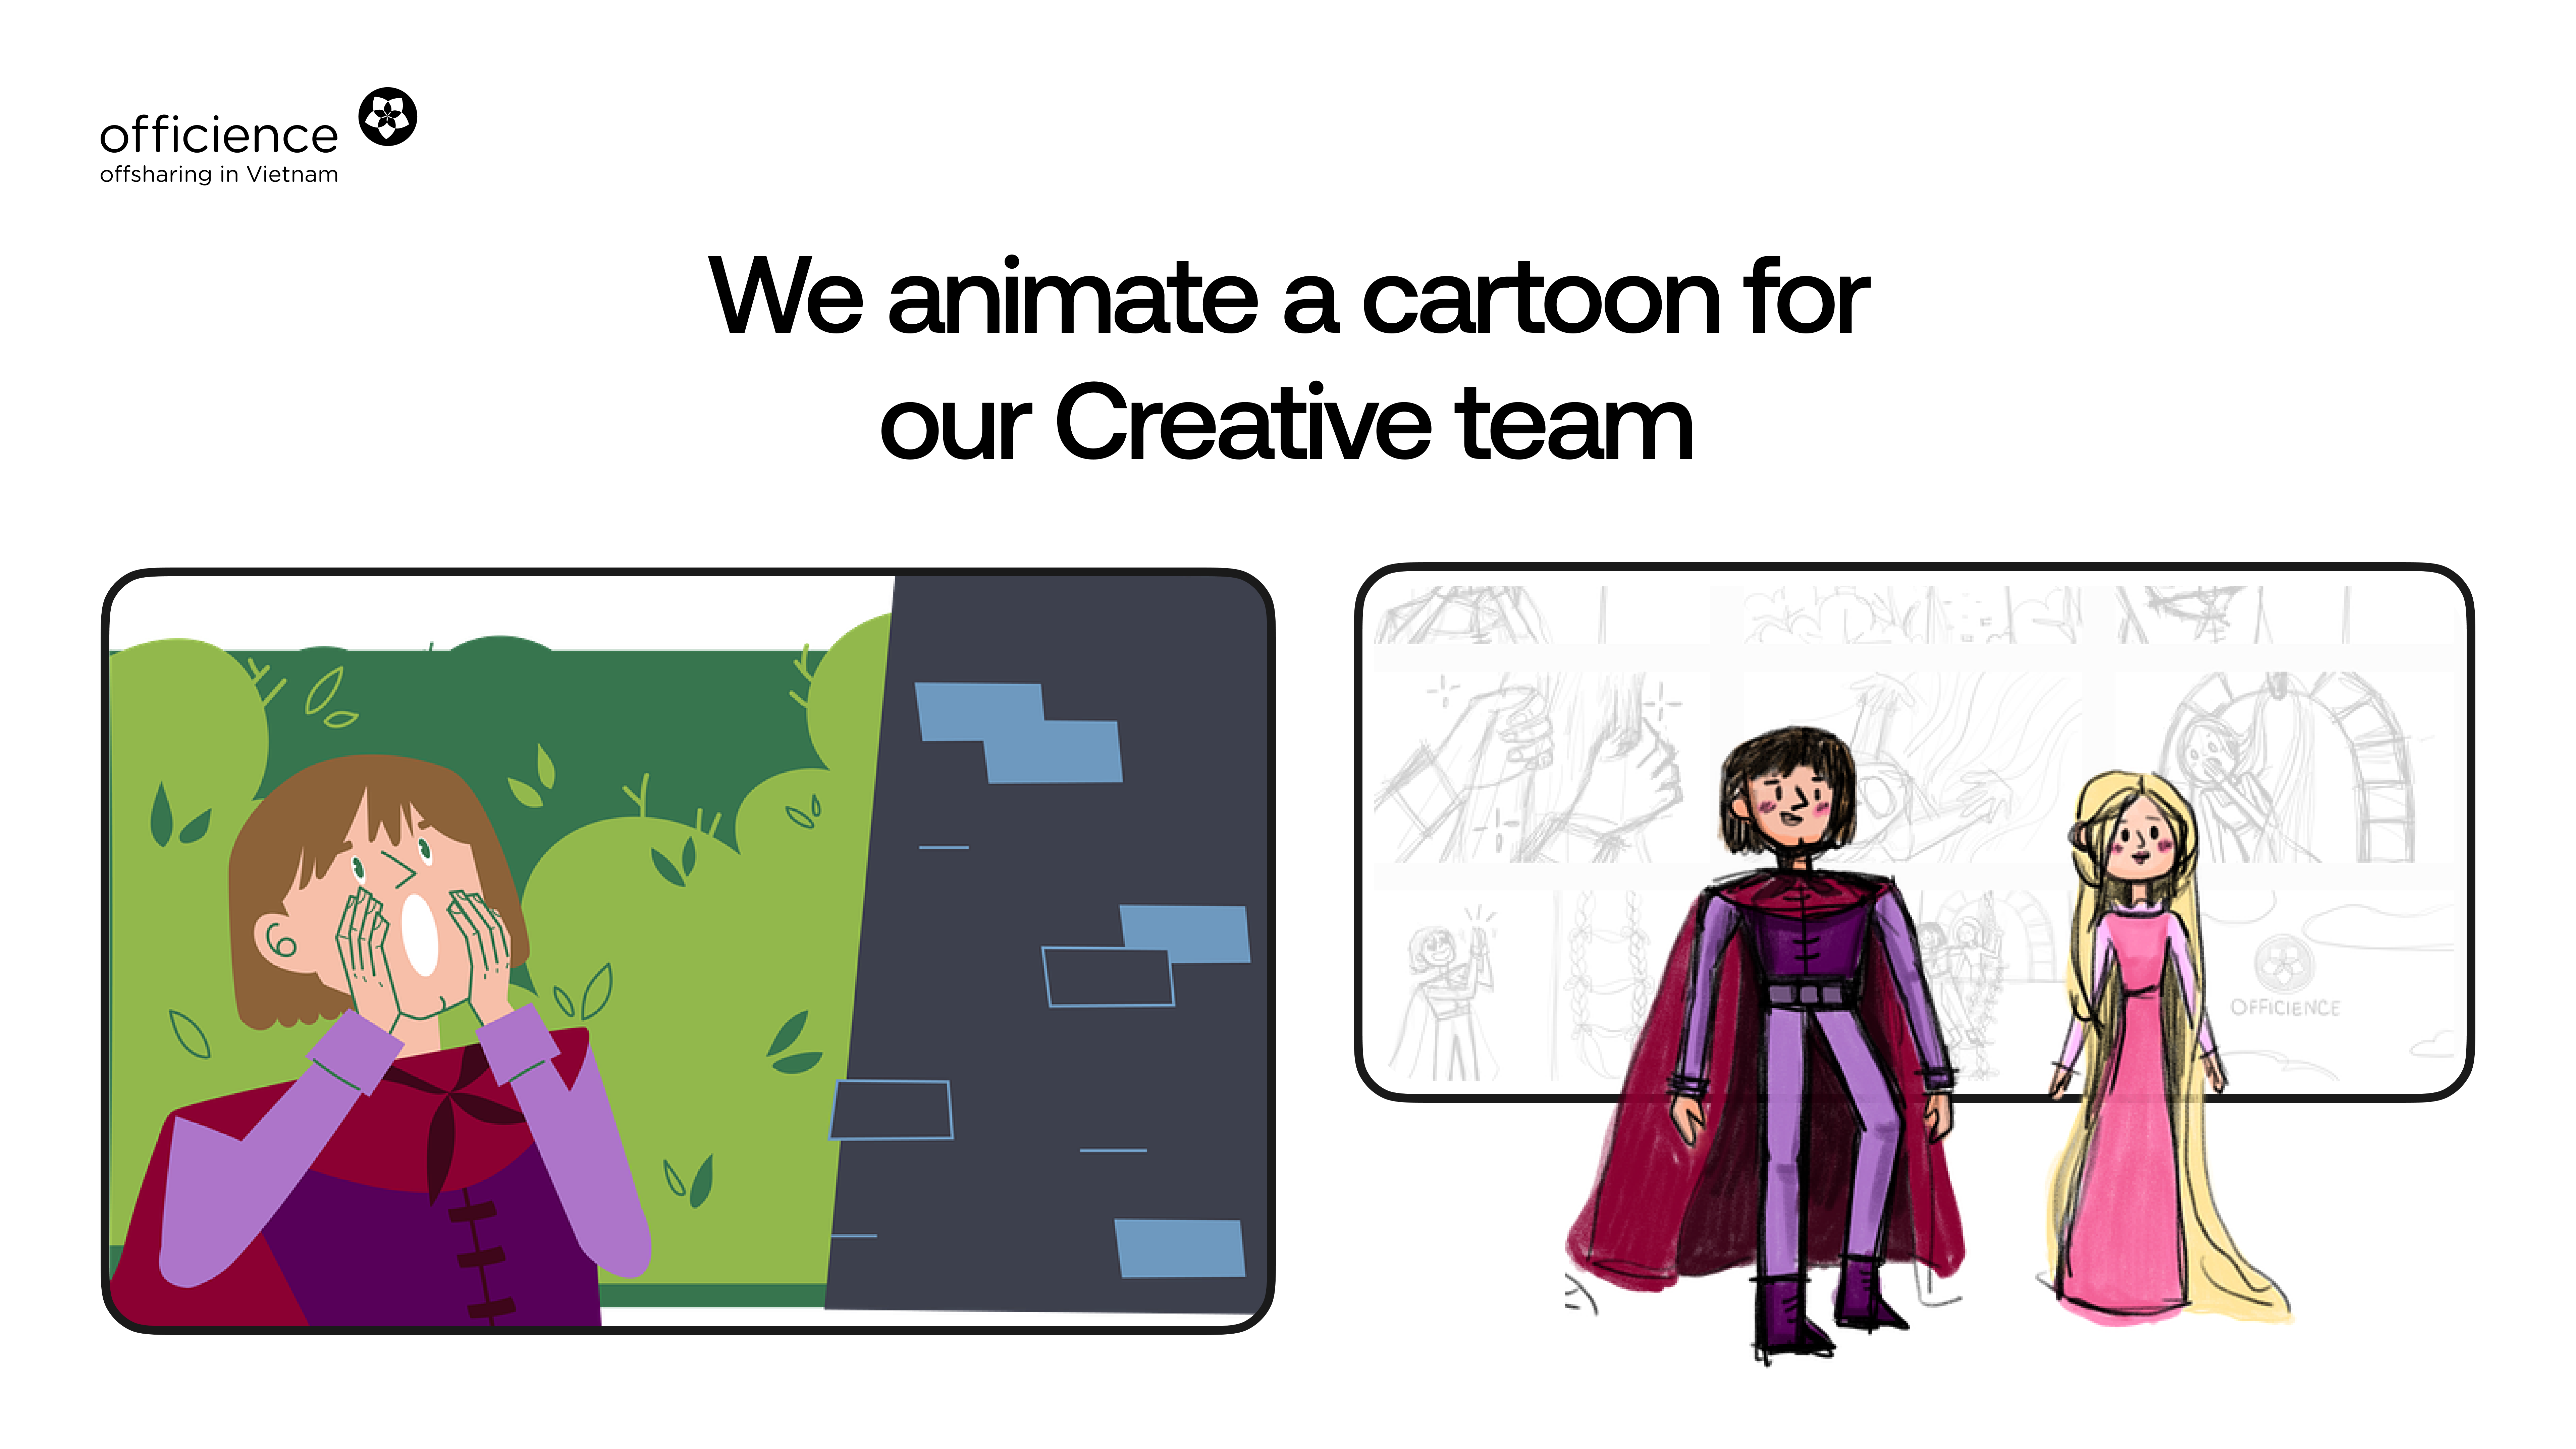 How to animate a video - We successfully create a 2D animation to promote ourselves